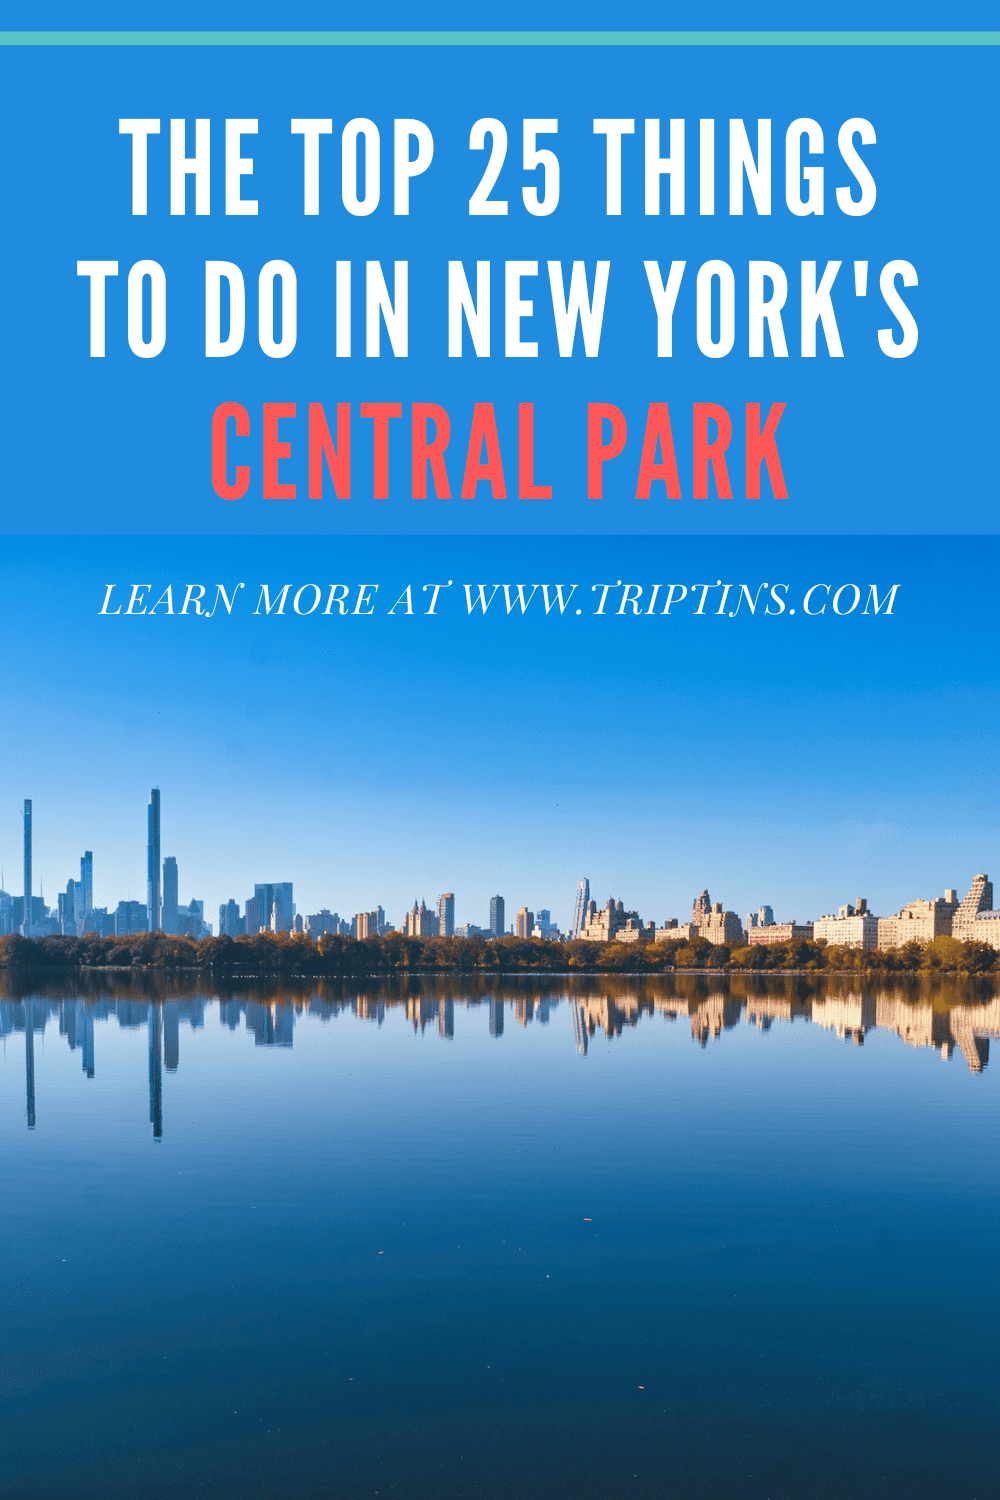 Best Things To Do in Central Park NYC